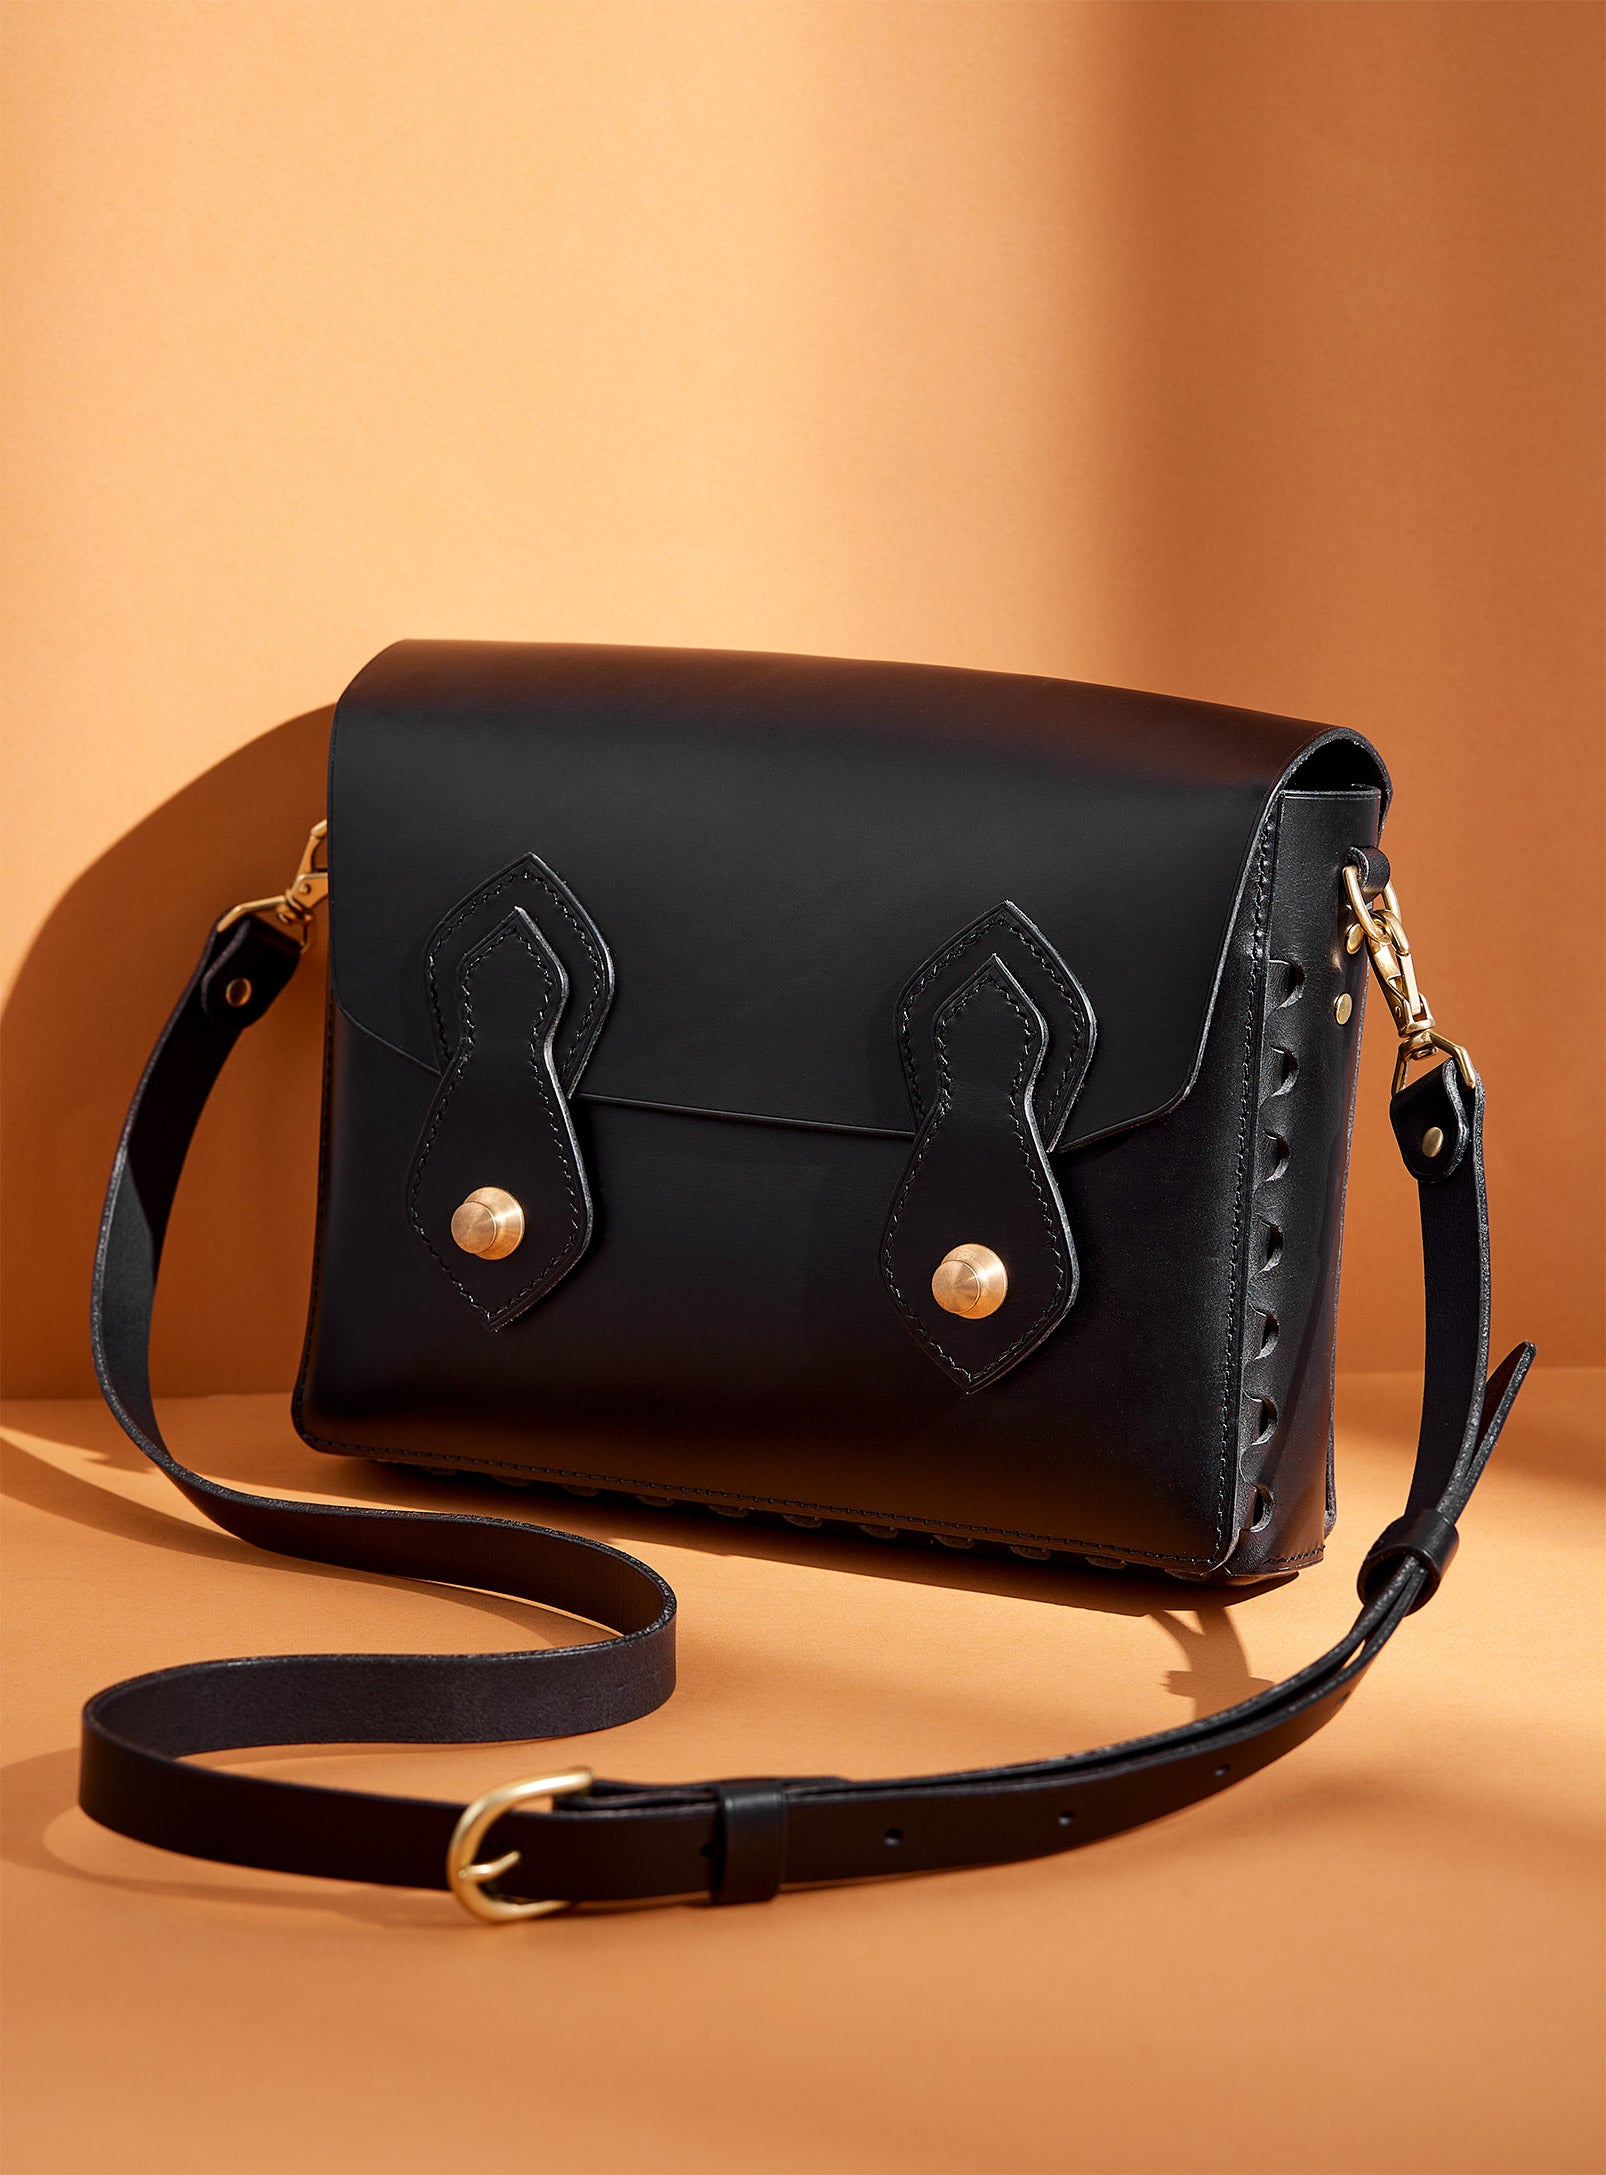 The modjūl odyssey bag in black. A large side bag with crossbody straps and double brass closure. Handcrafted in Canada using vegetable dyed Italian leather and quality brass hardware. 